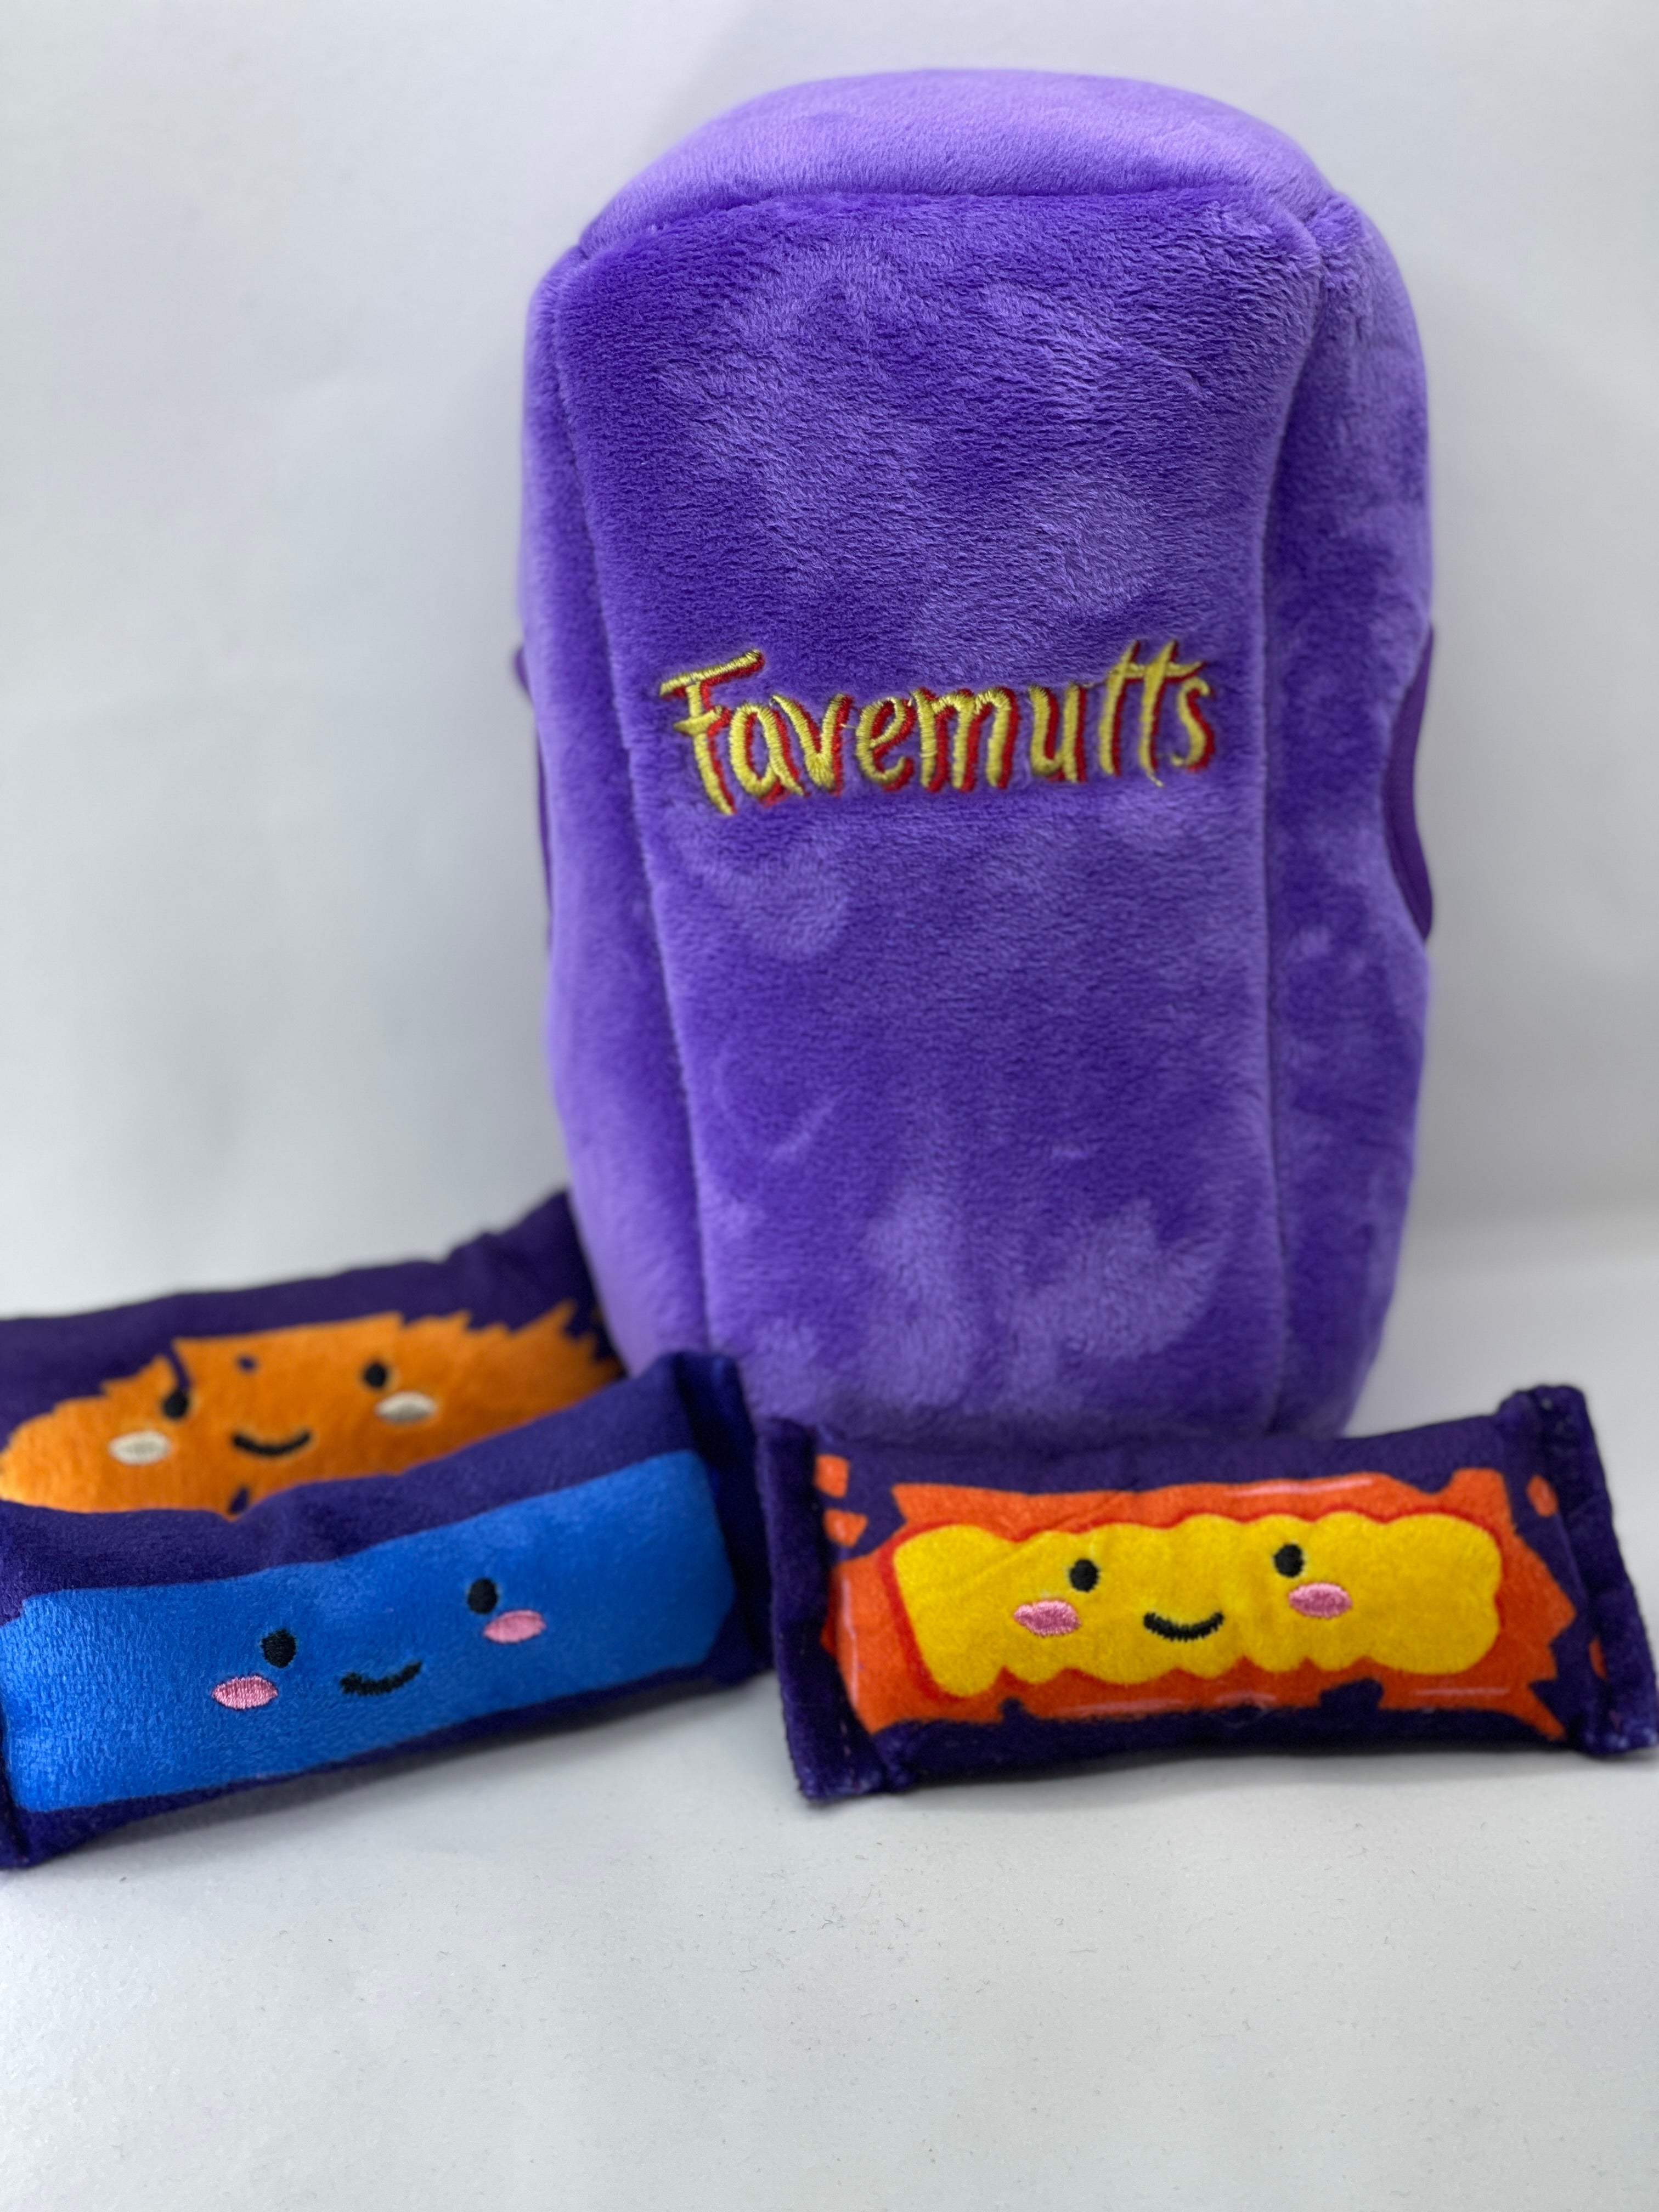 TWOMOODLES BURROW TOY - FAVEMUTTS